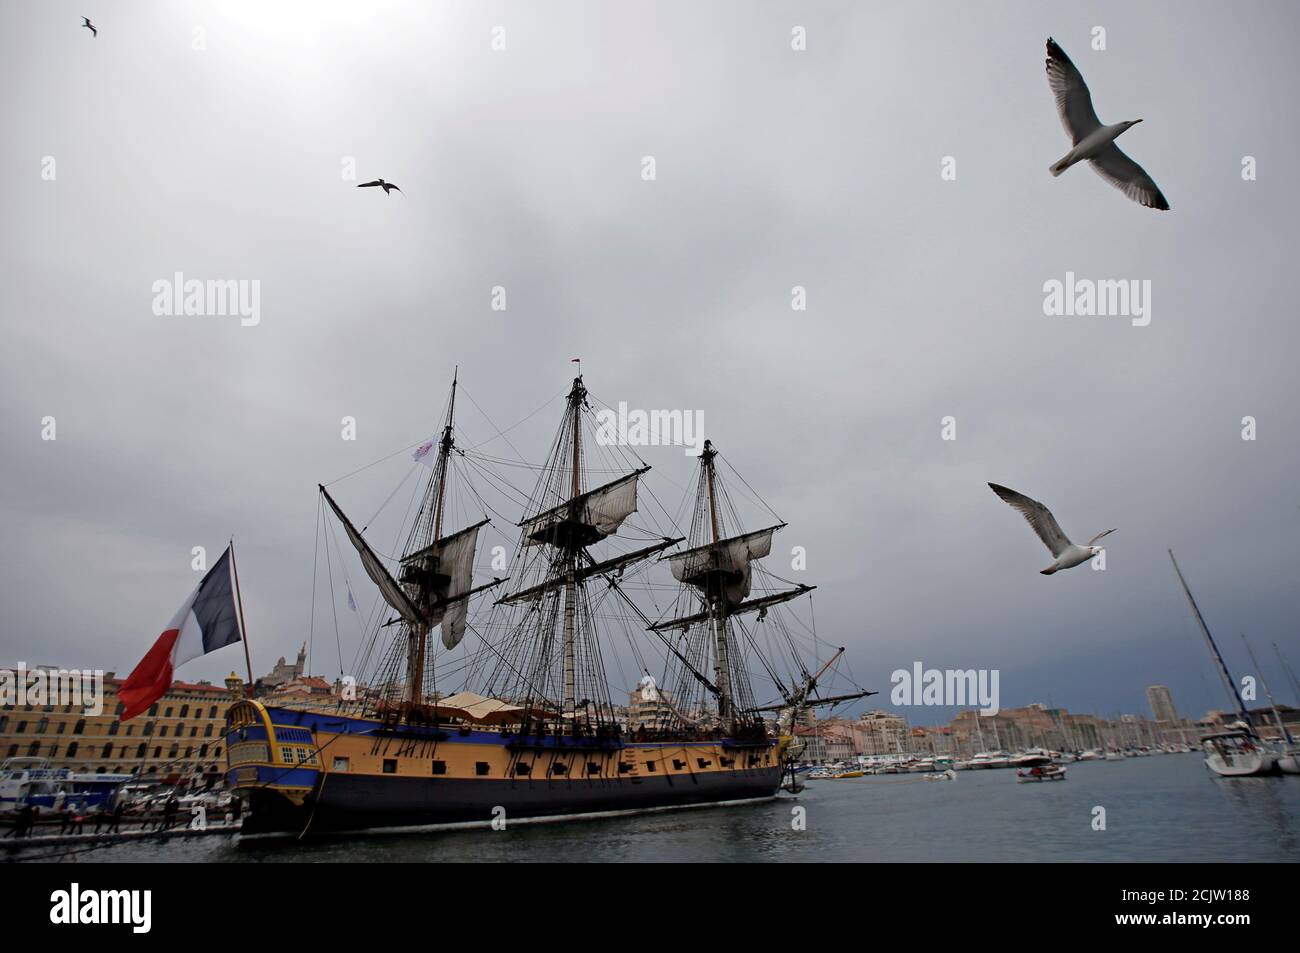 The Hermione, a replica of an 18th Century French sailing ship that  transported General La Fayette to America in 1780 to rally U.S. rebels  battling for independence, is moored at the Marseille